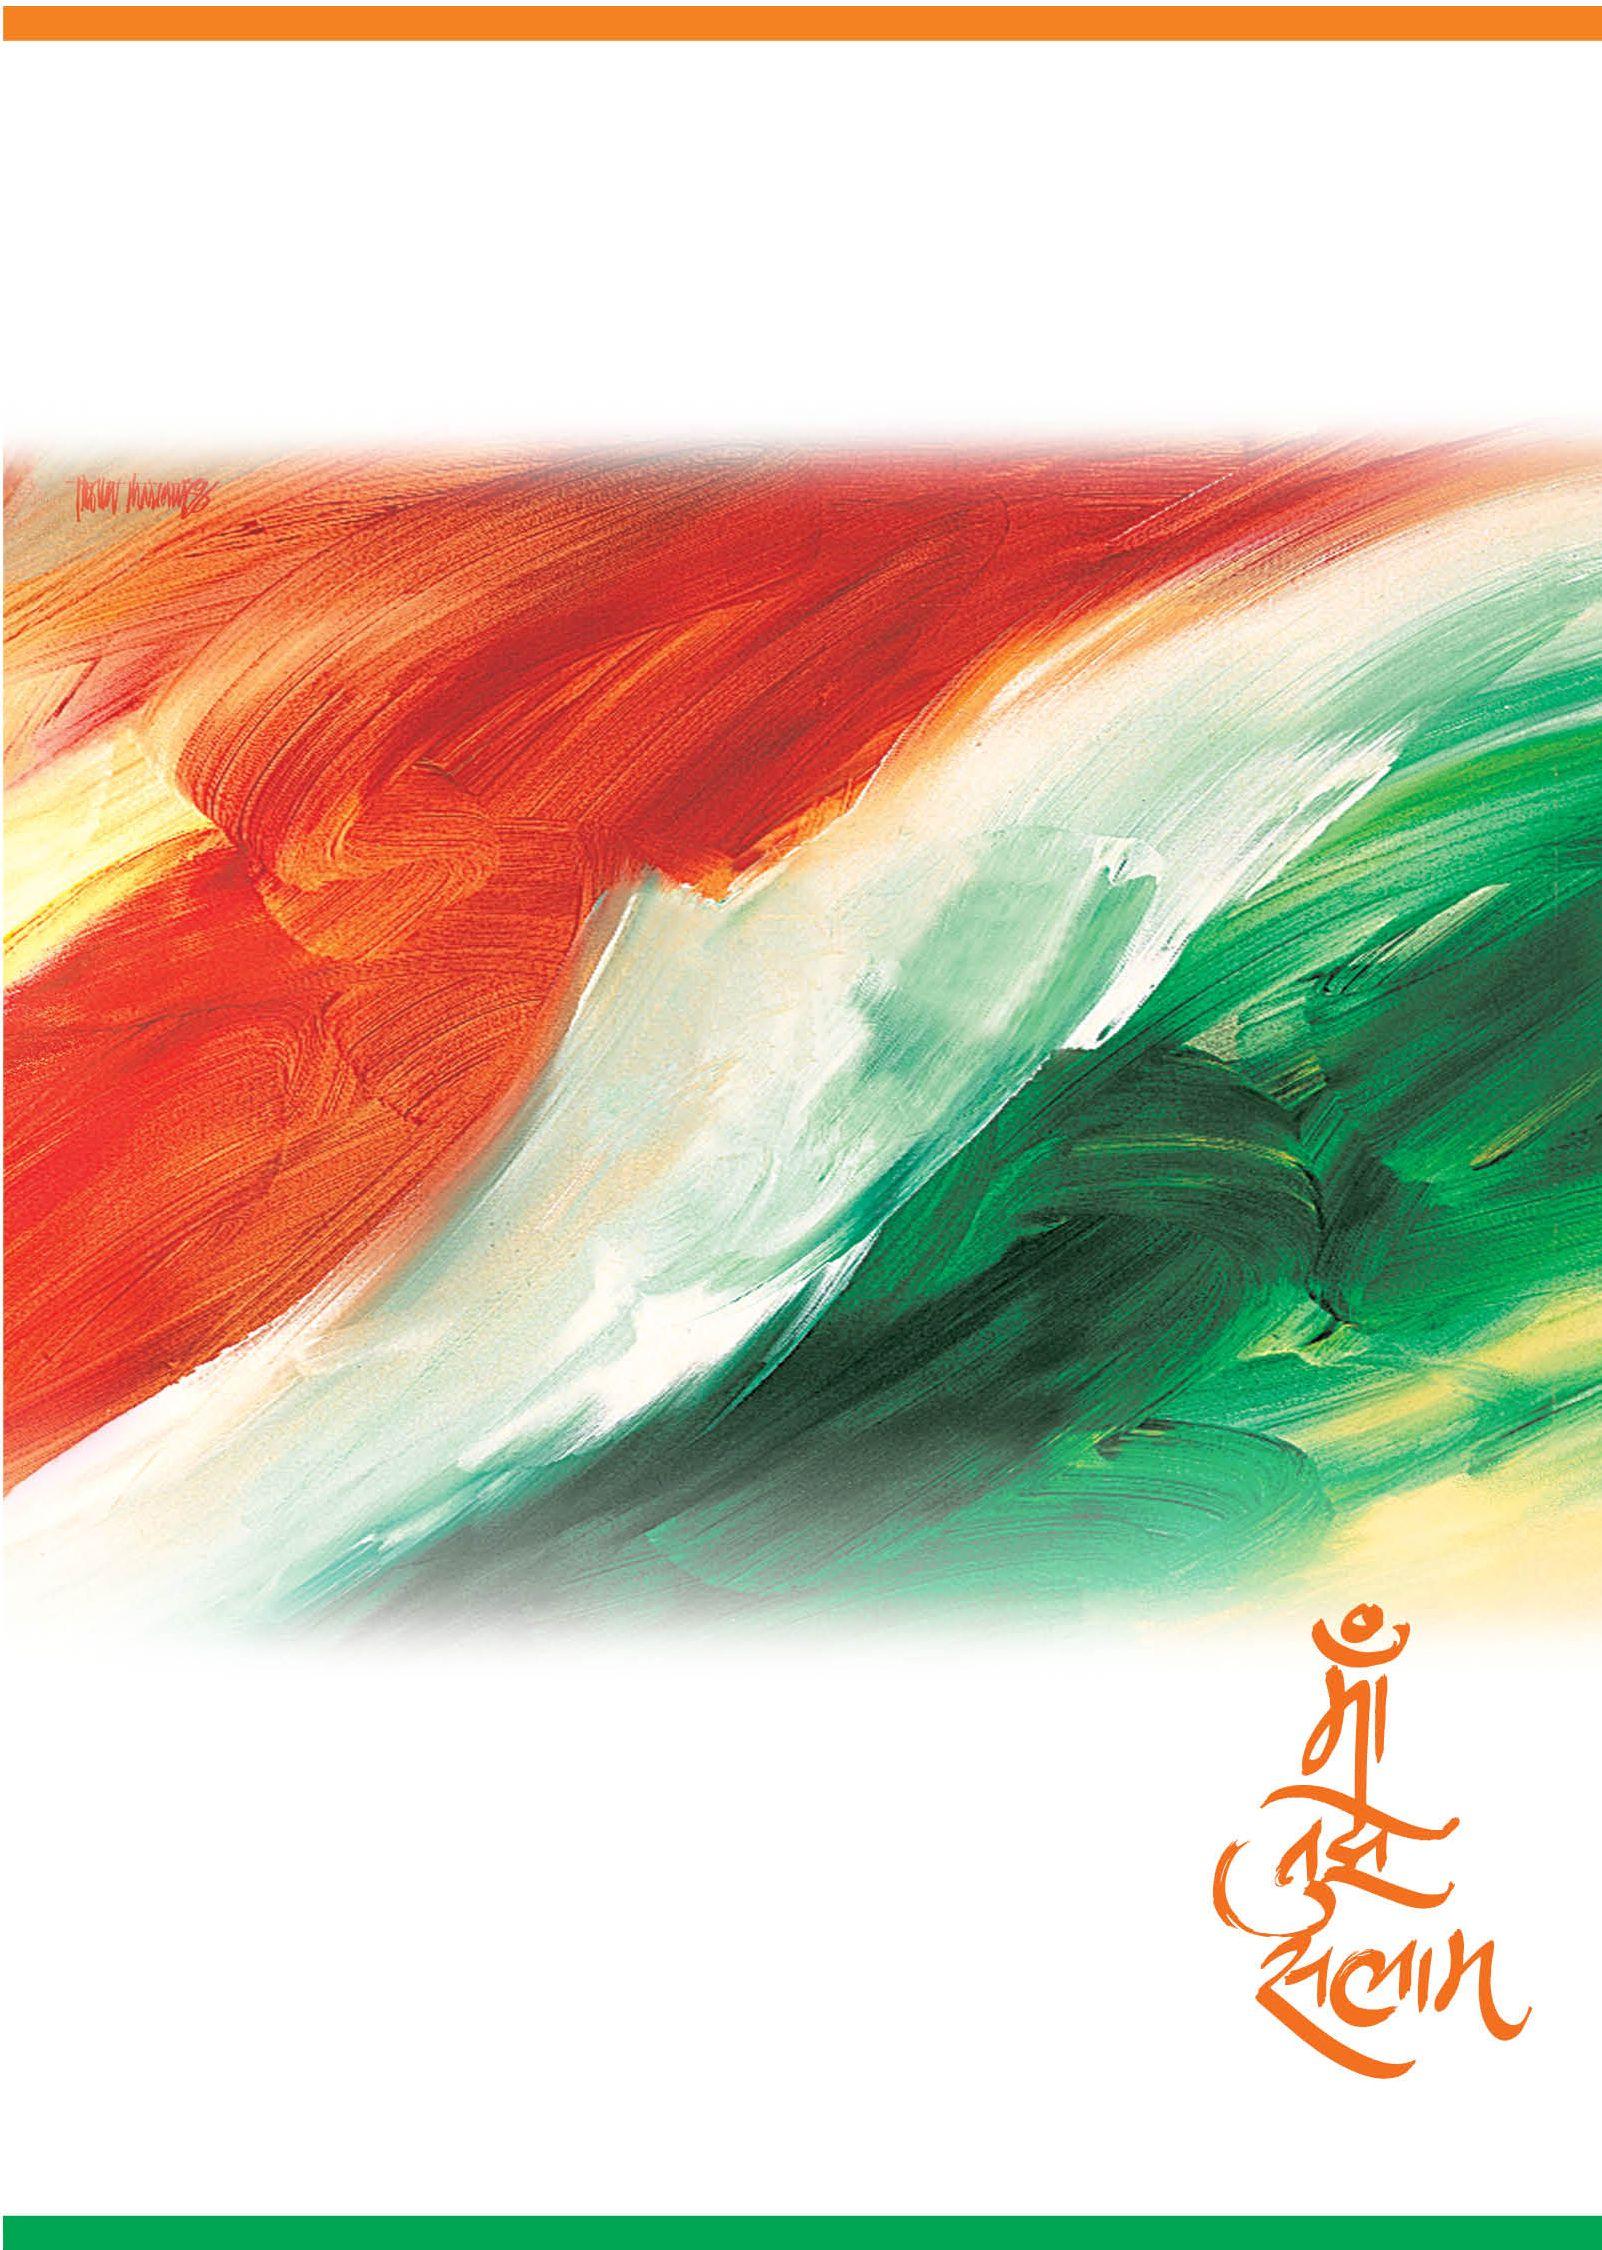 Artistically portraying the Indian National flag colours